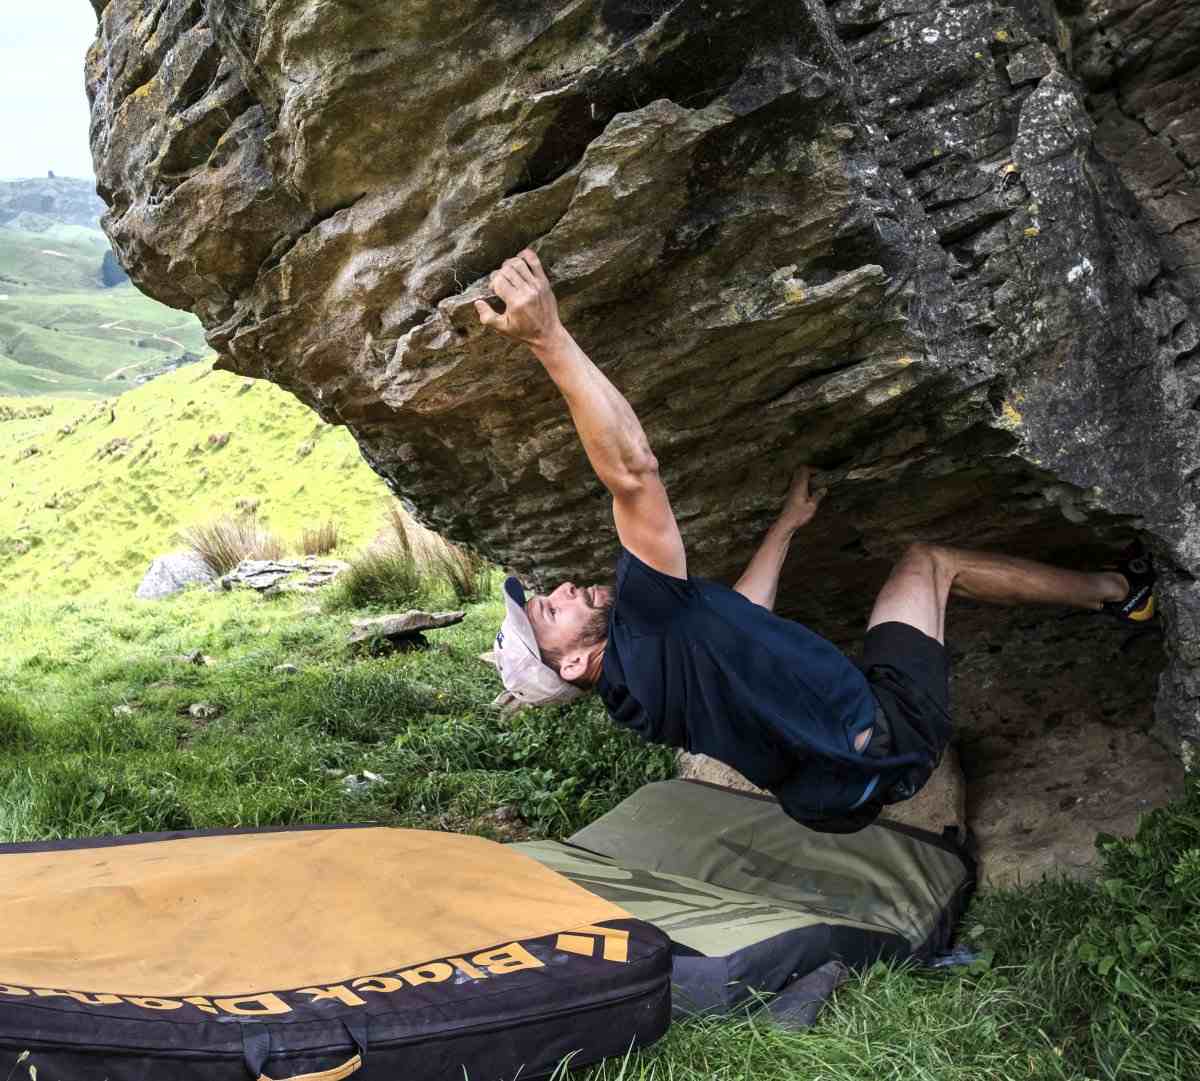 Boulderer in cap under steep limestone overhang at ground level with pads.